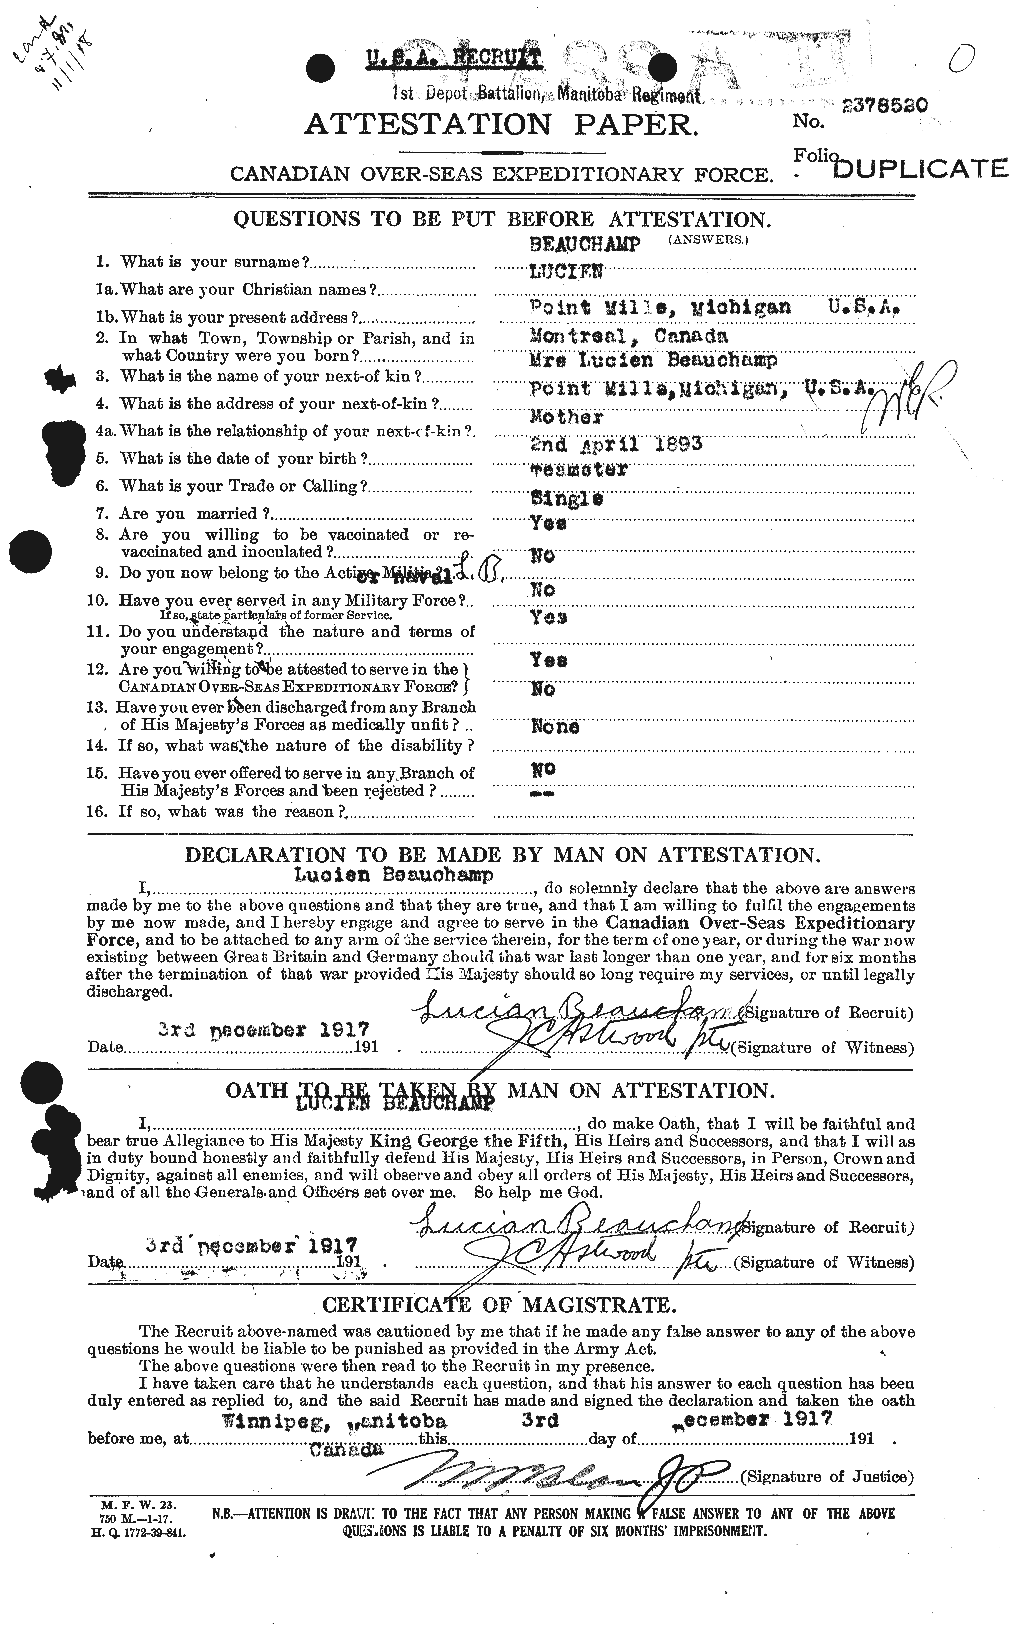 Personnel Records of the First World War - CEF 231004a